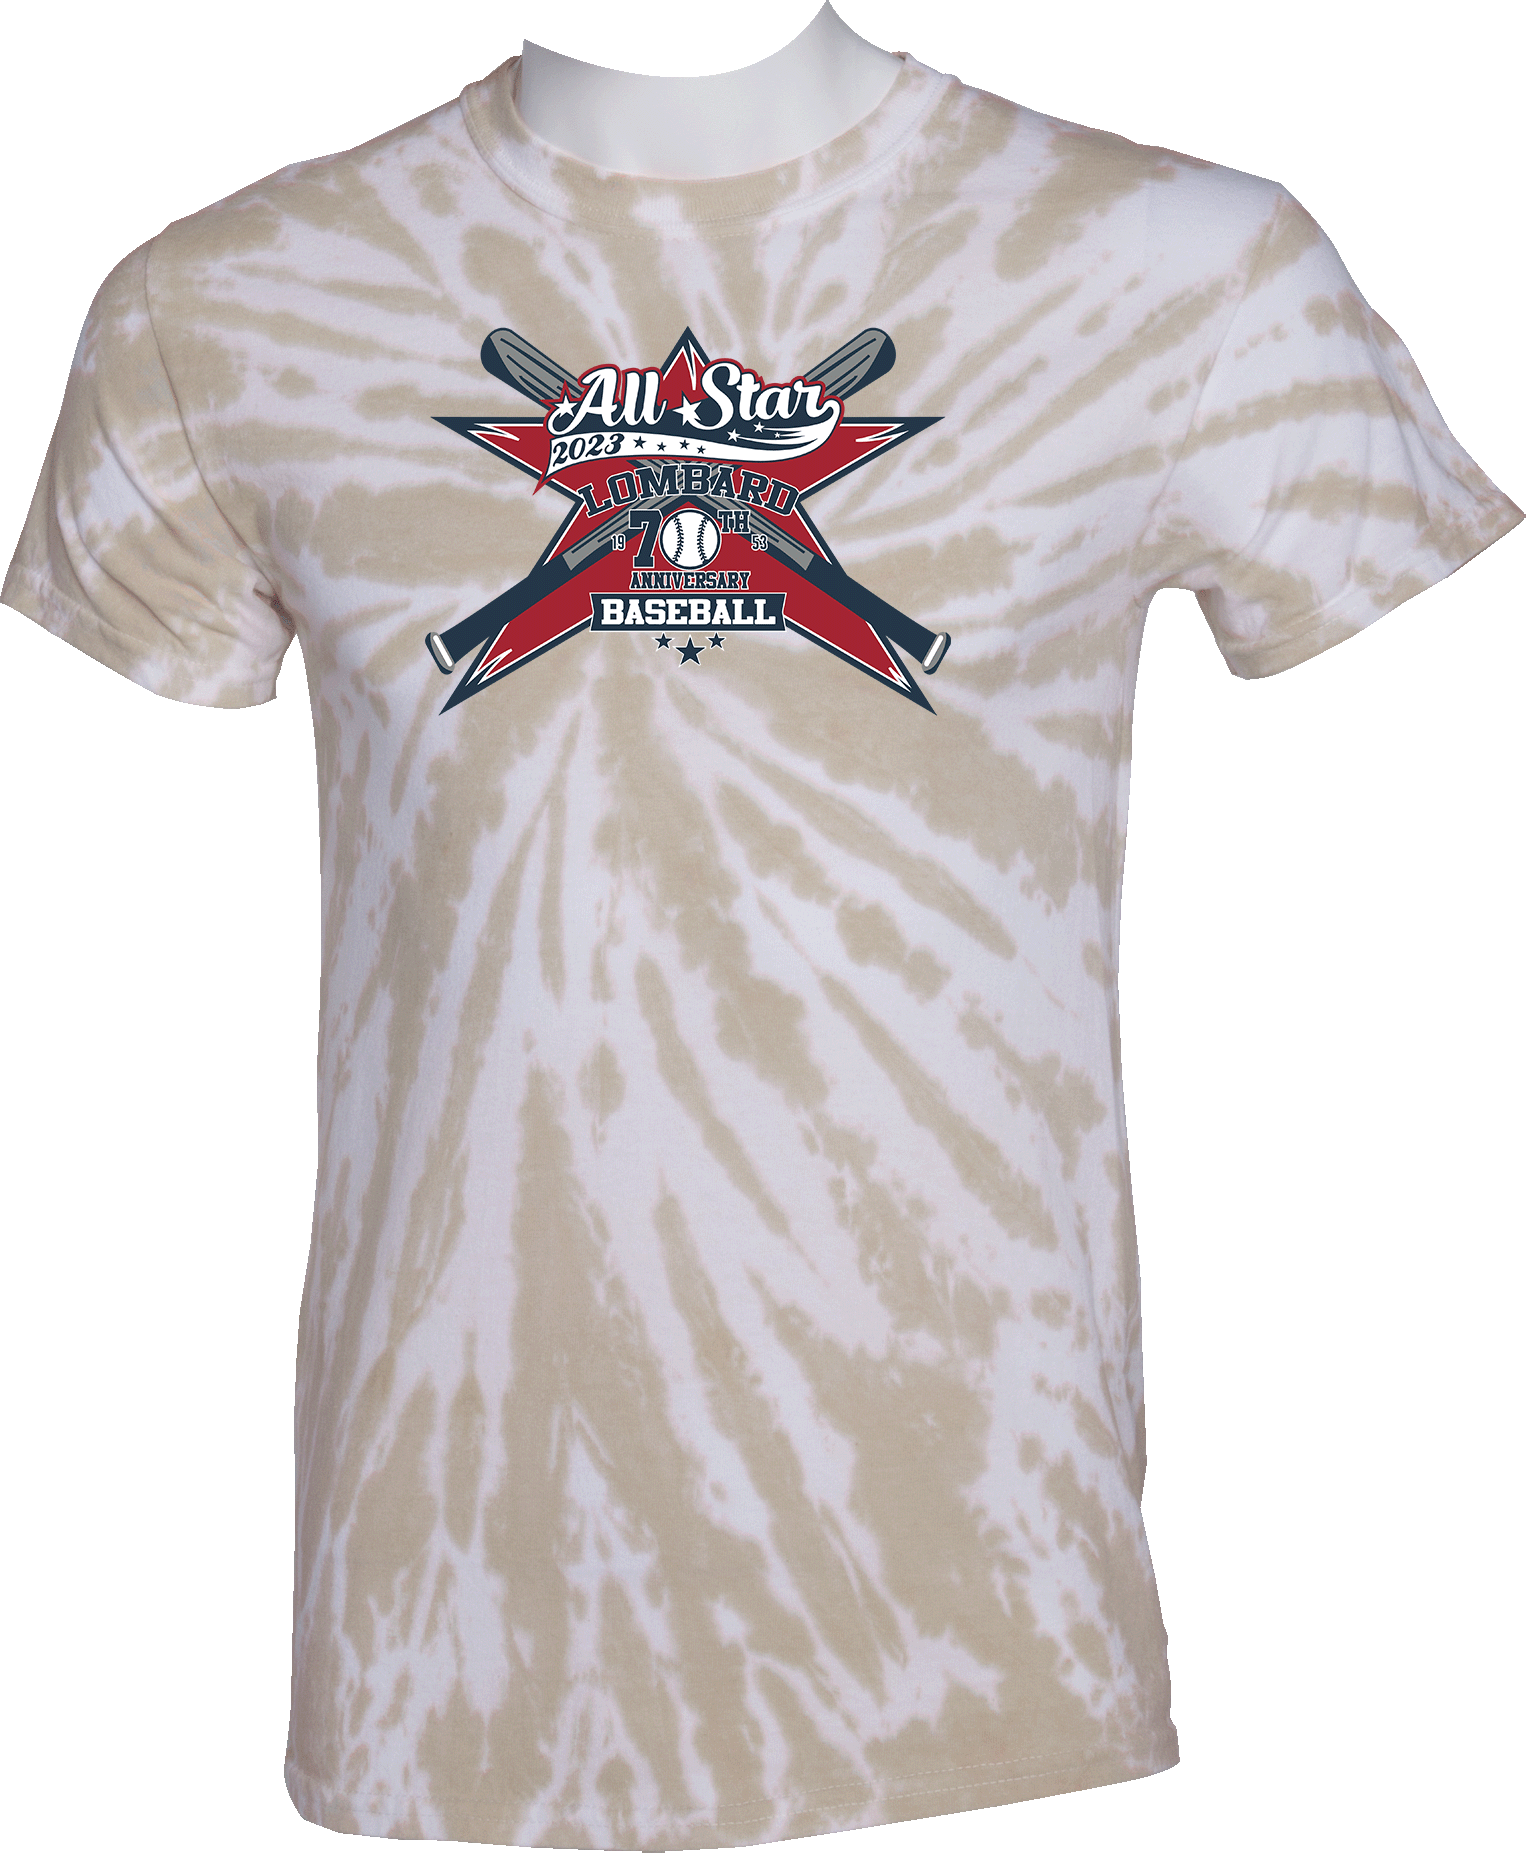 TIE-DYE SHORT SLEEVES - 2023 Lombard Baseball League's 70th Anniversary All Star Event